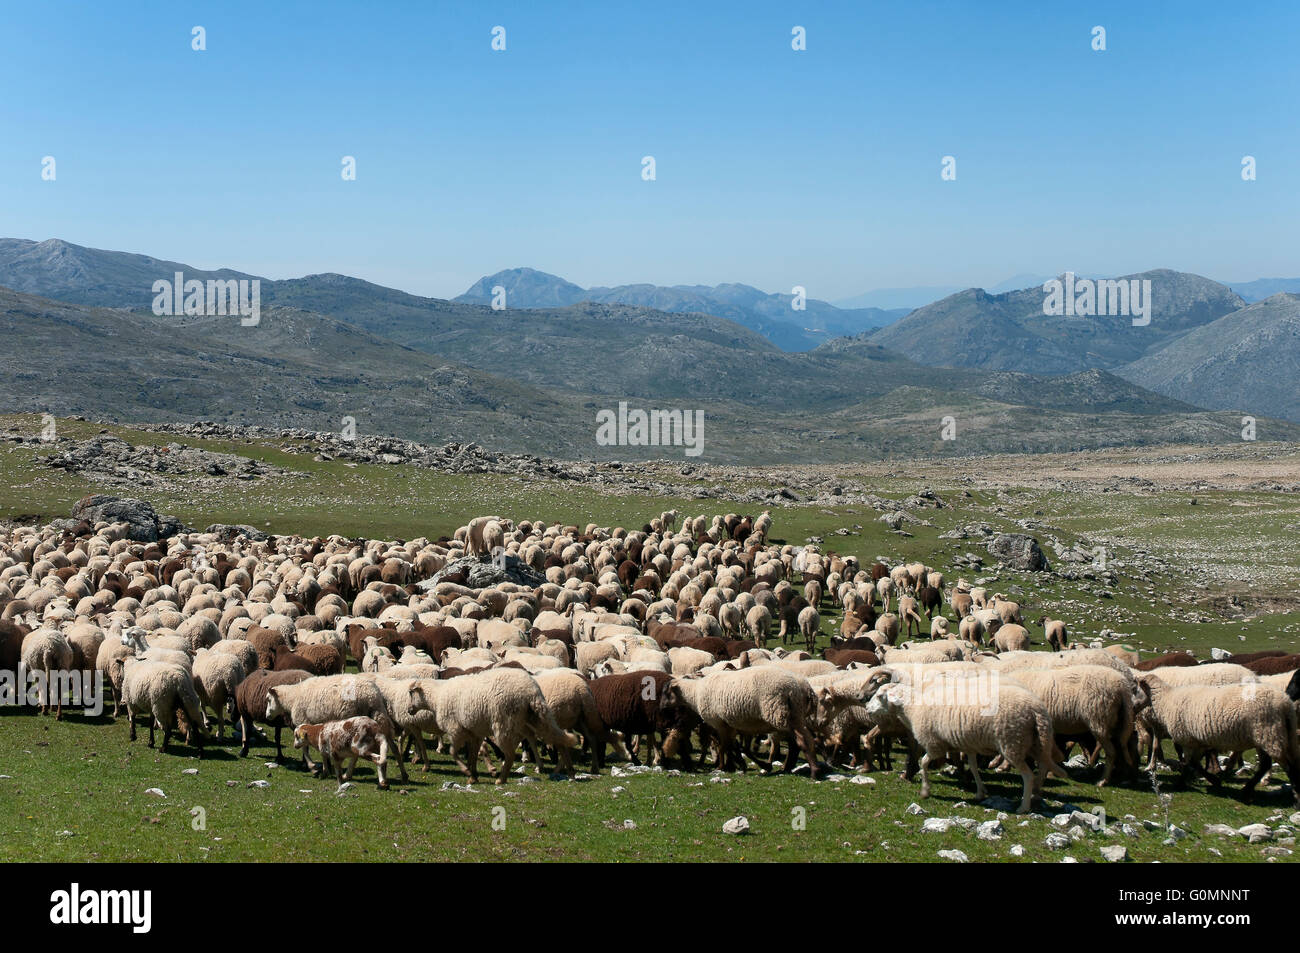 Sheep of the breed Lojeña, Loja mountains, Granada province, Region of Andalusia, Spain, Europe Stock Photo